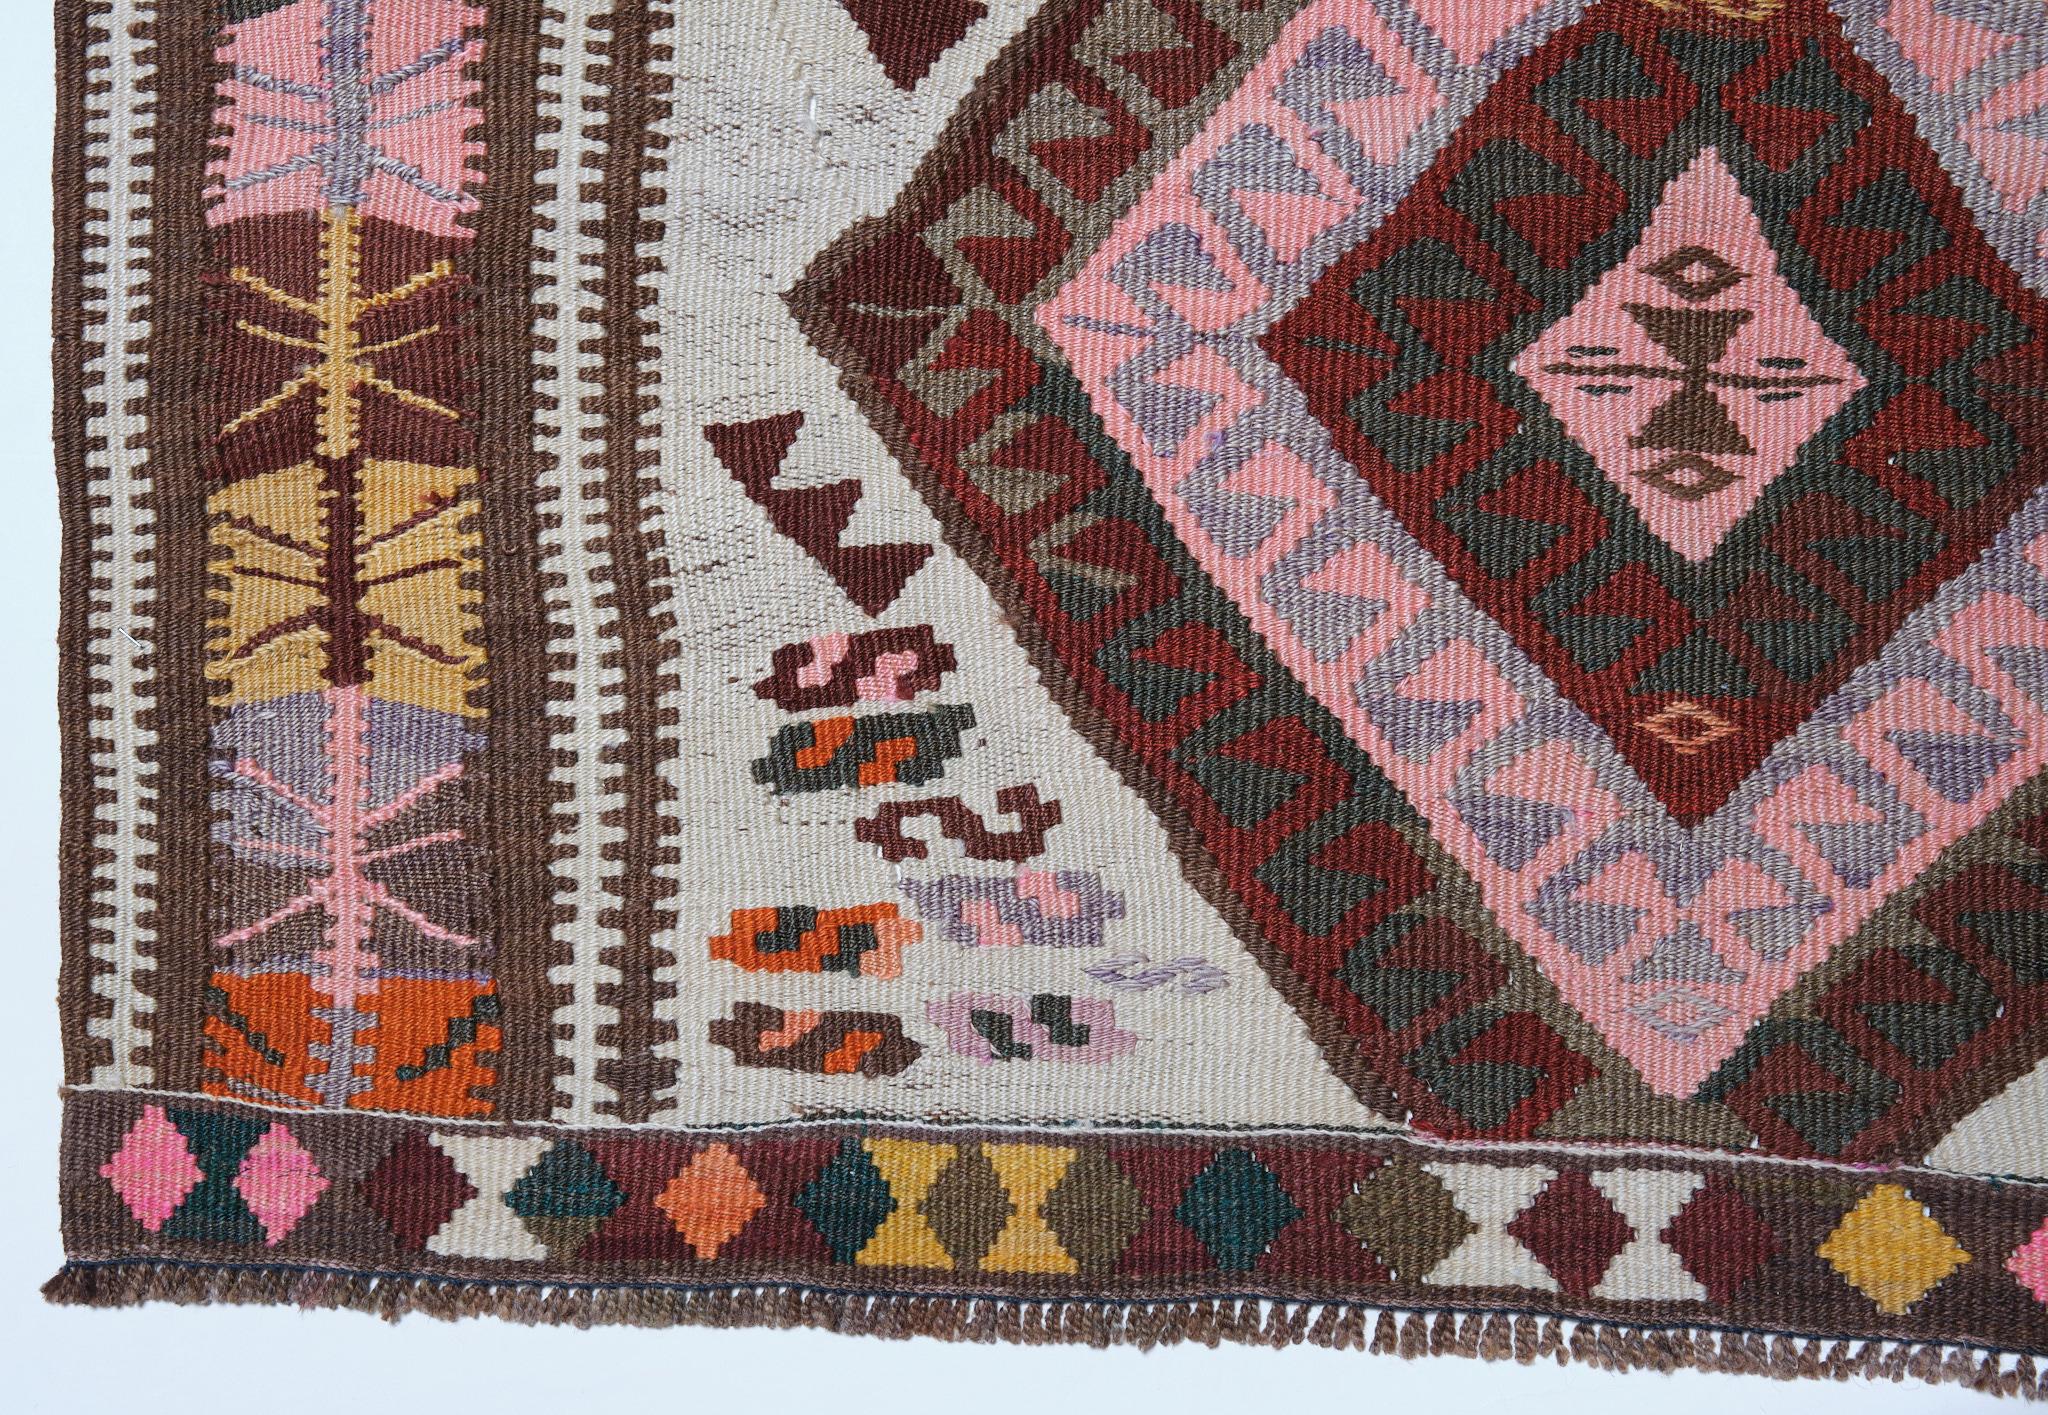 This is an Eastern Anatolian Vintage Kilim from the Kars region with a rare and beautiful color composition.

The old sector and newer southern districts of Kars are joined by a bridge built by the Seljuk Turks over the Kars Cayi River. The town